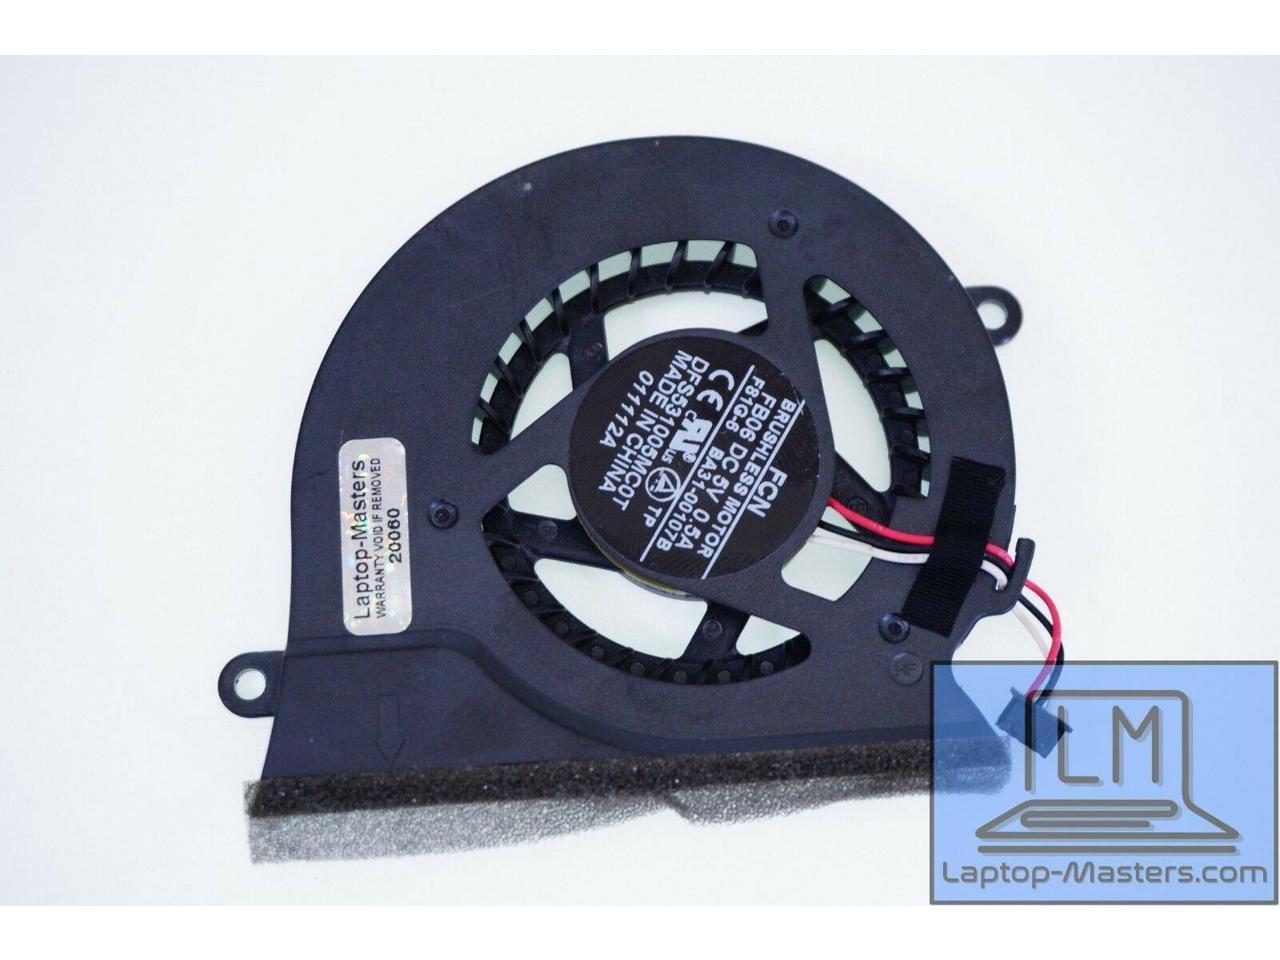 Laptop Replacement Cooler Fan for ASUS G46 G46V G46VM CPU Cooling Fan KSB06105HB-CE1A 13GNMM1AM0501